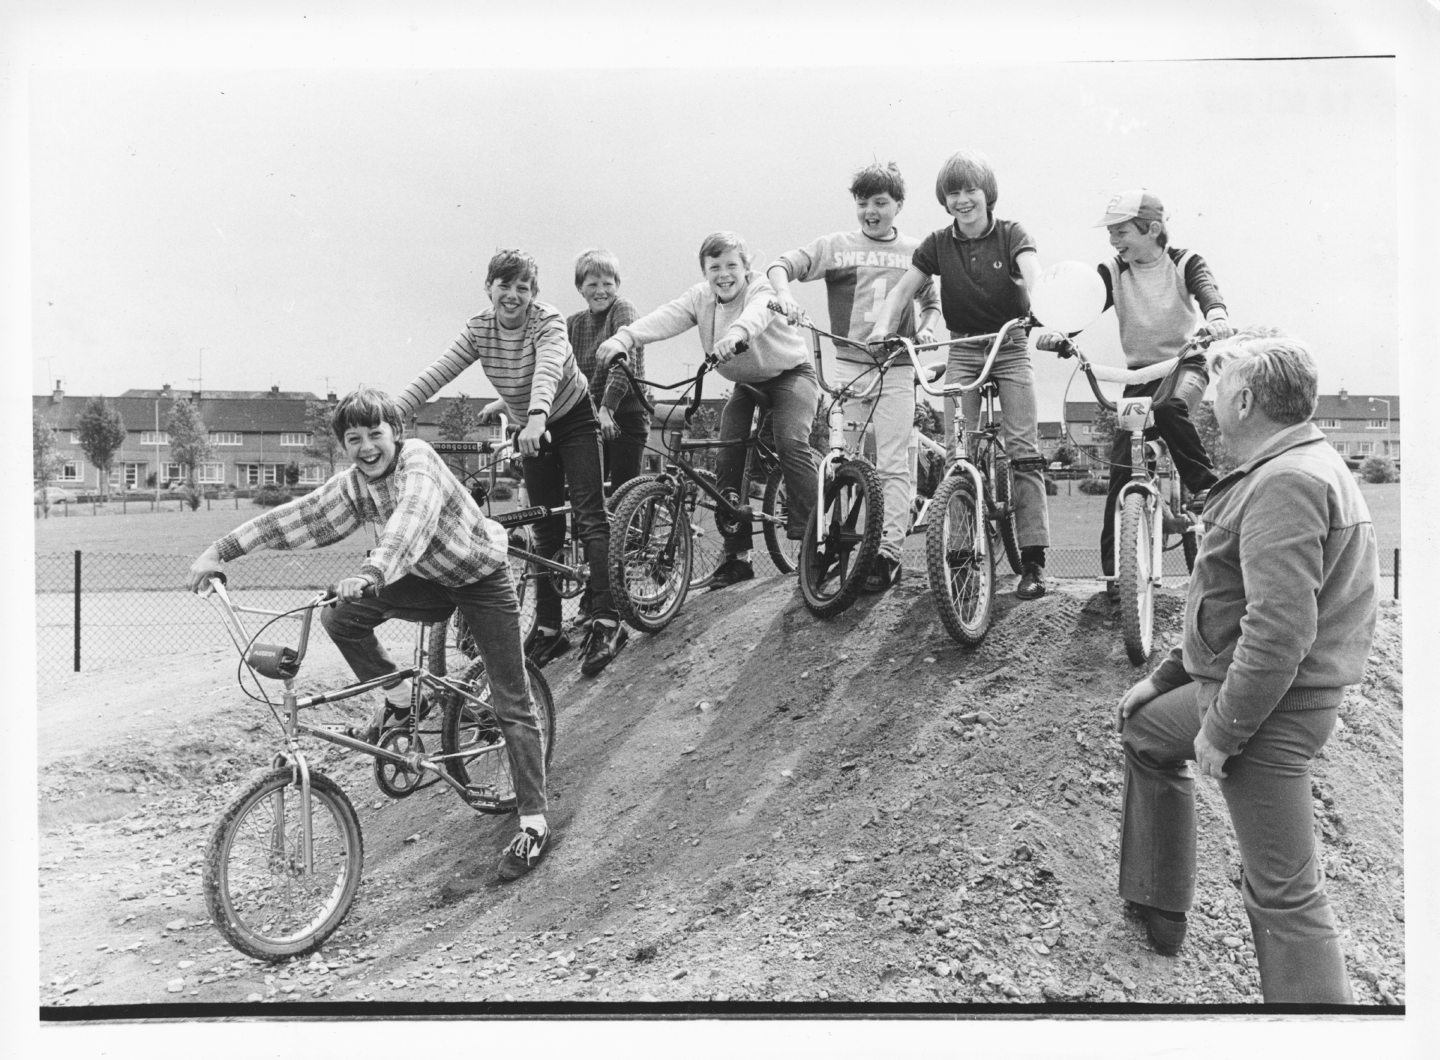 Councillor Brian Rattray watches youngsters try out the new BMX track beside the Beacon Centre at Bucksburn in 1985.